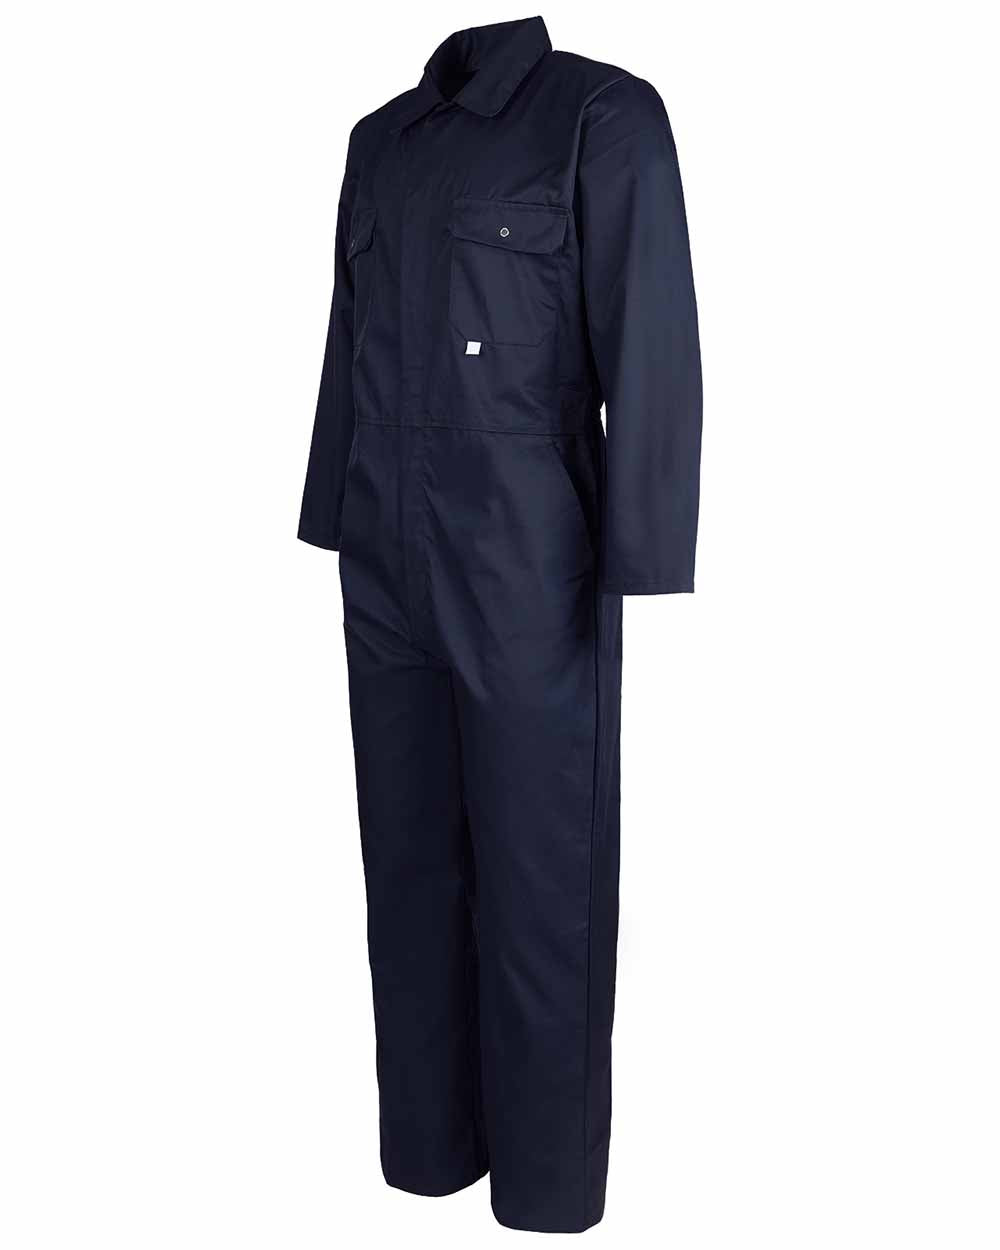 Navy Blue coloured Fort Stud Front Boilersuit on white background 